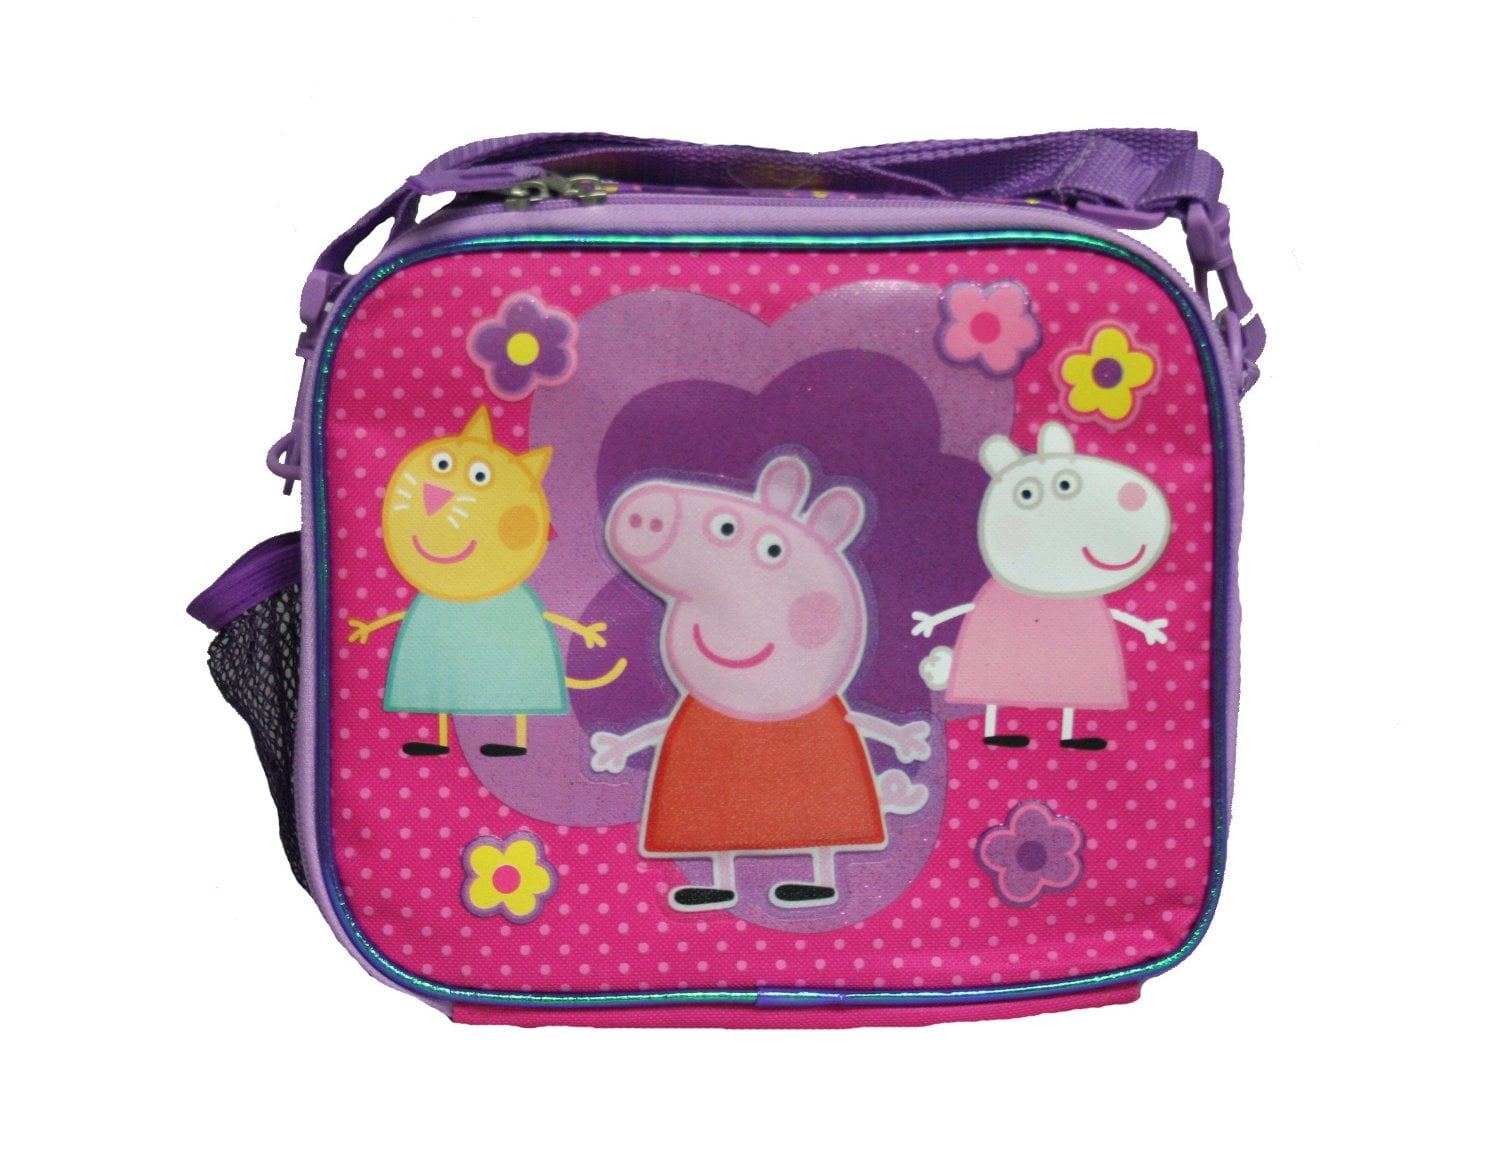 NWT Peppa Pig Pink Metal Lunch Box for Little Girls Offical Licensed Product 